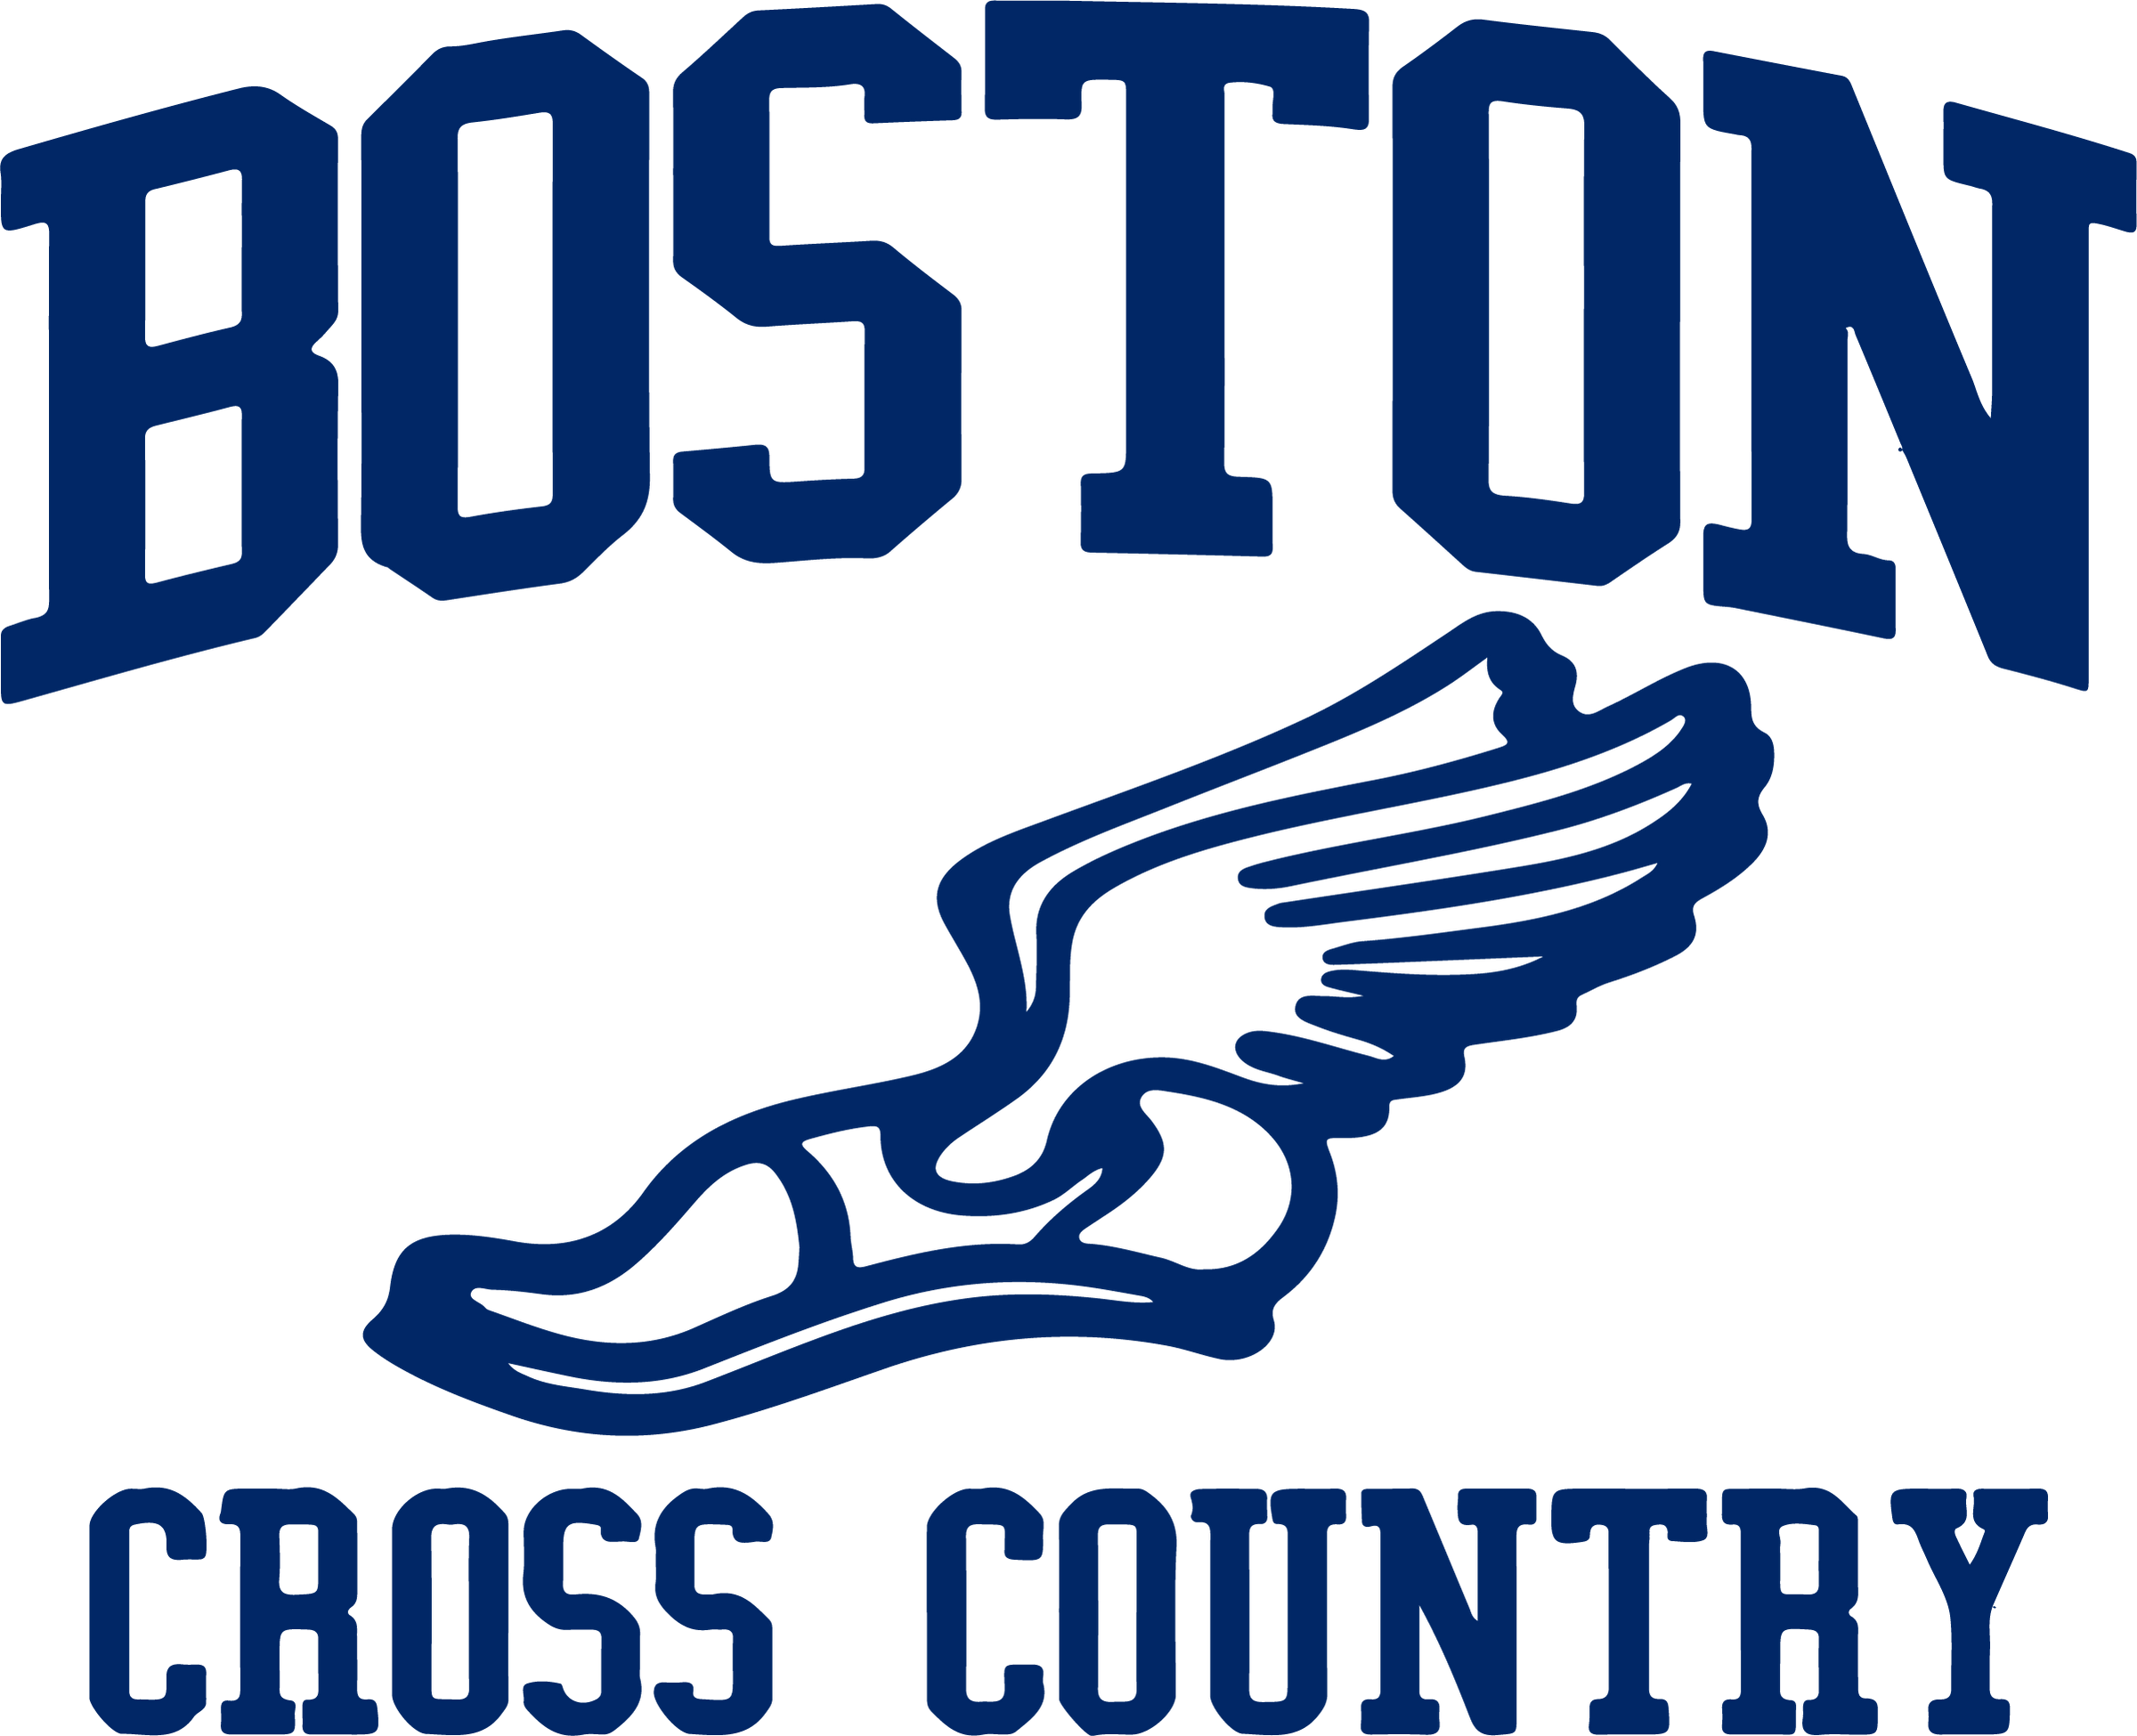 Boston City Cross Country and Track & Field